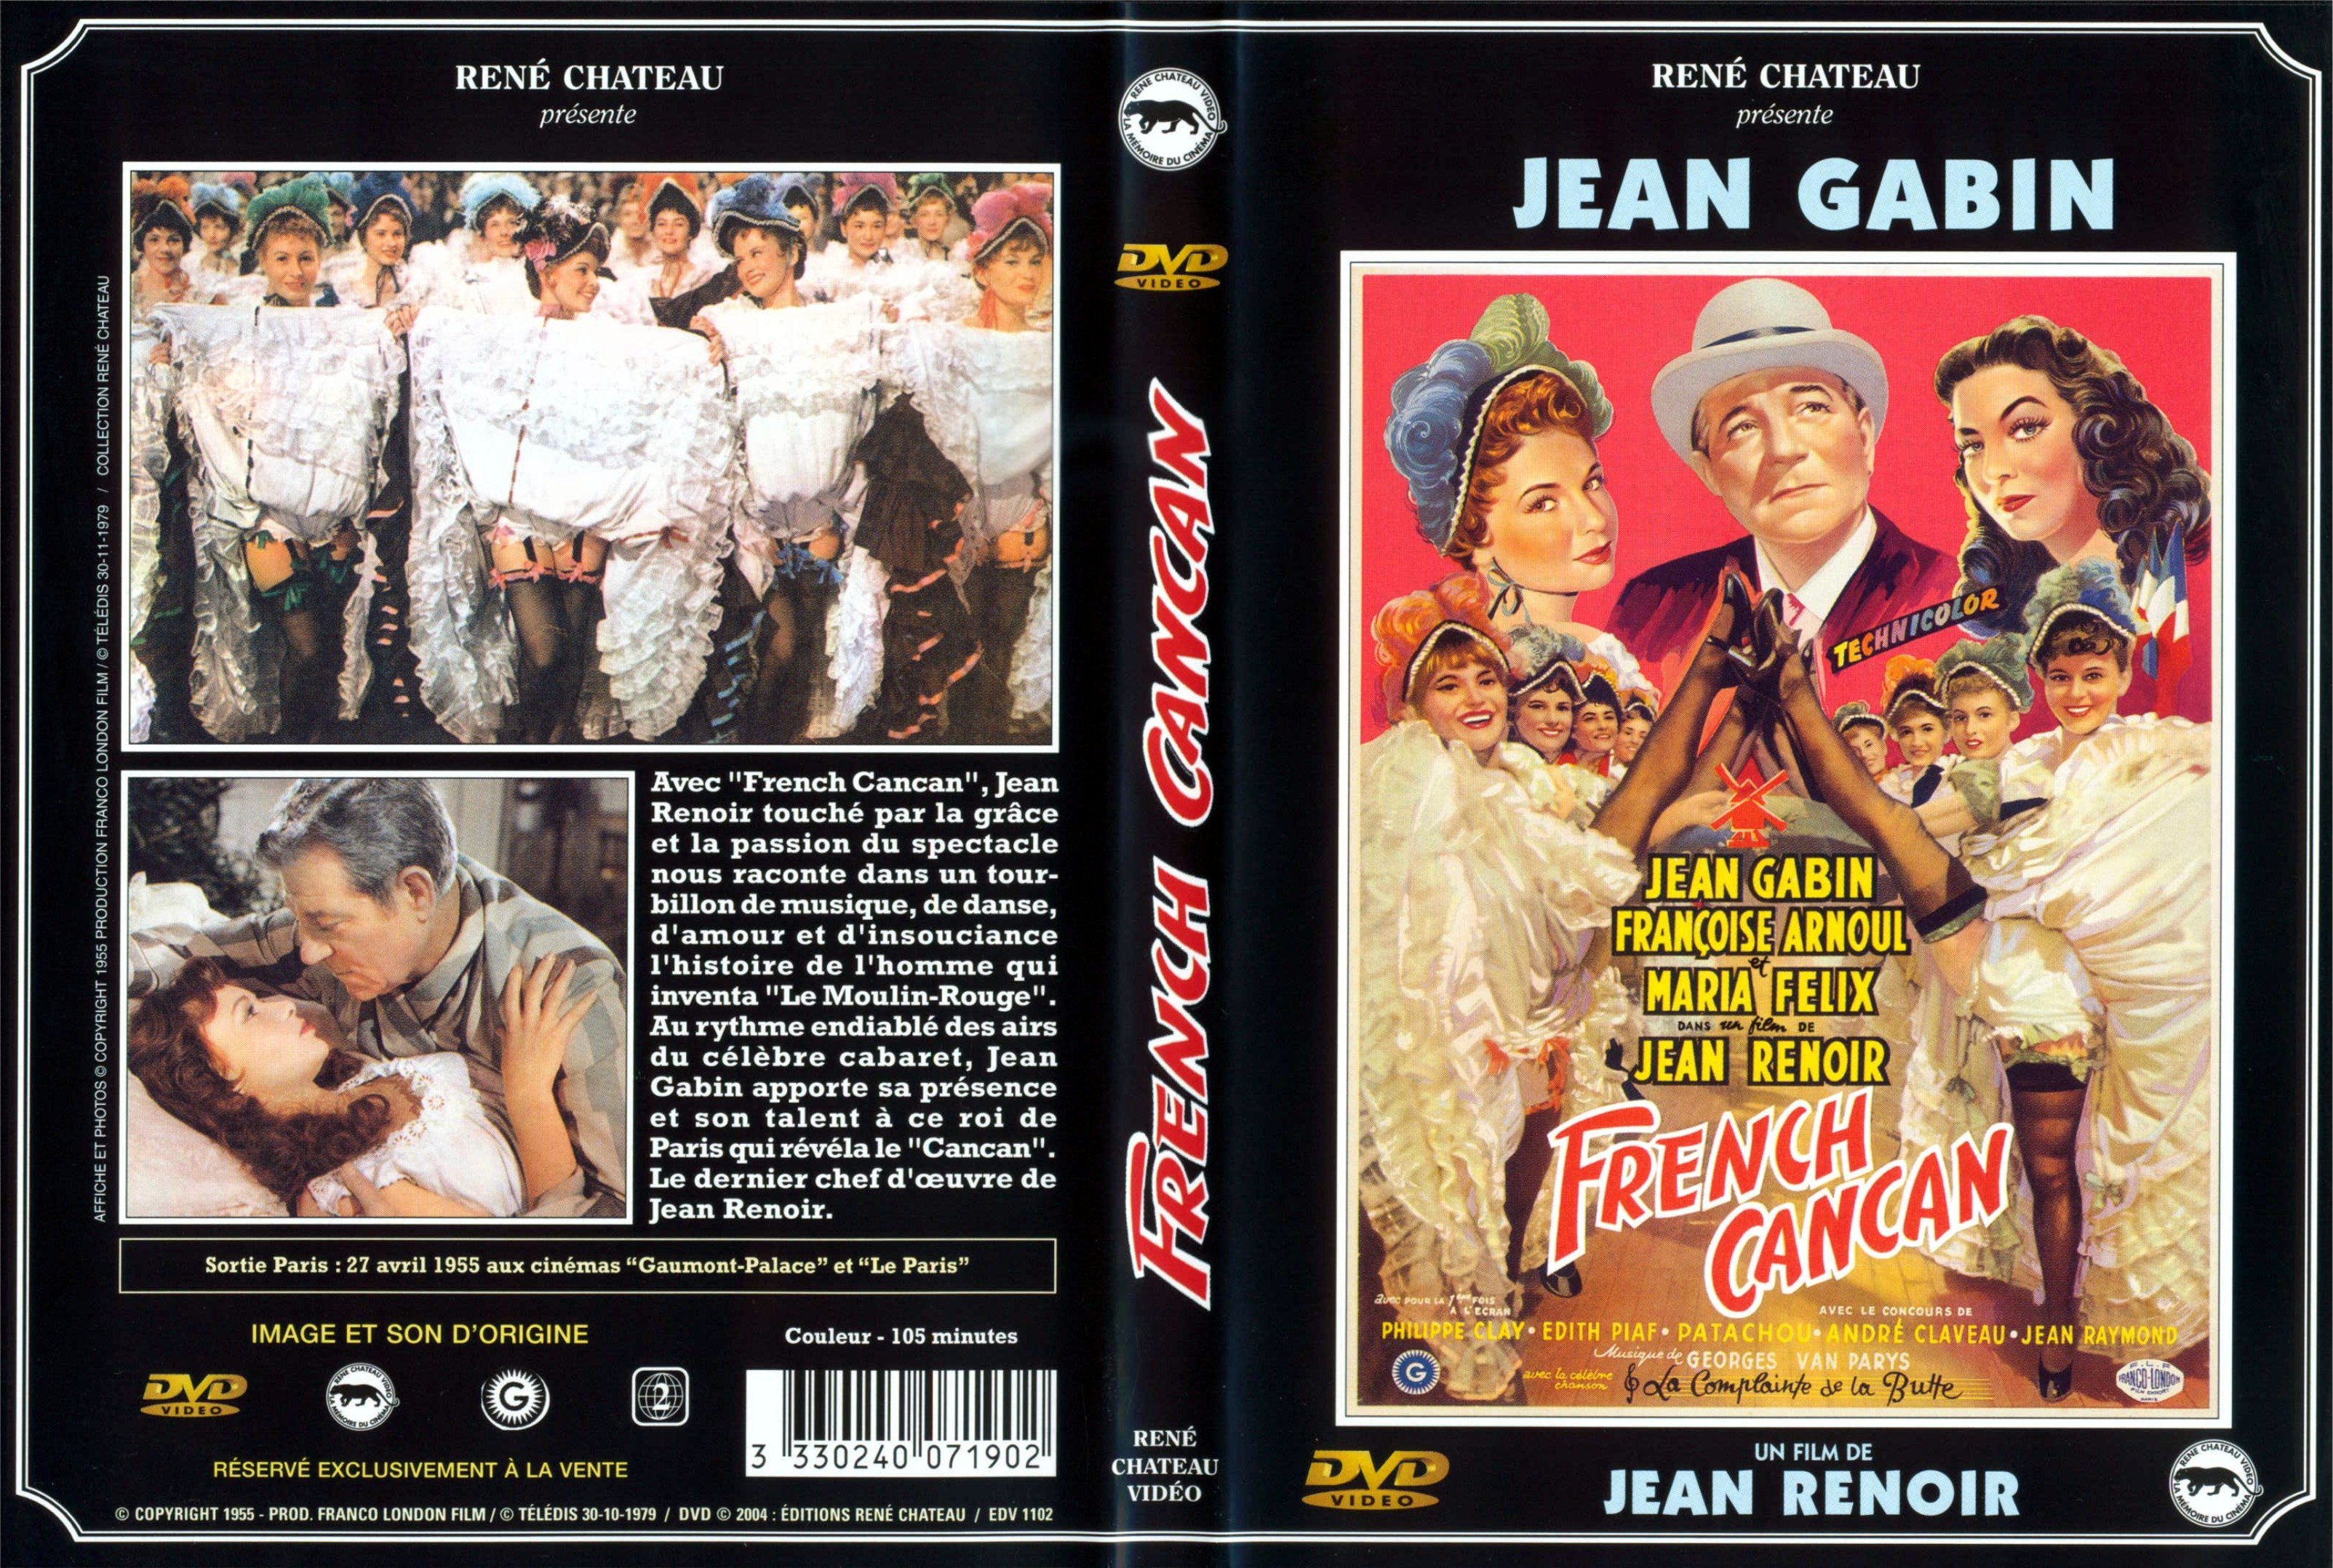 Jaquette DVD French cancan